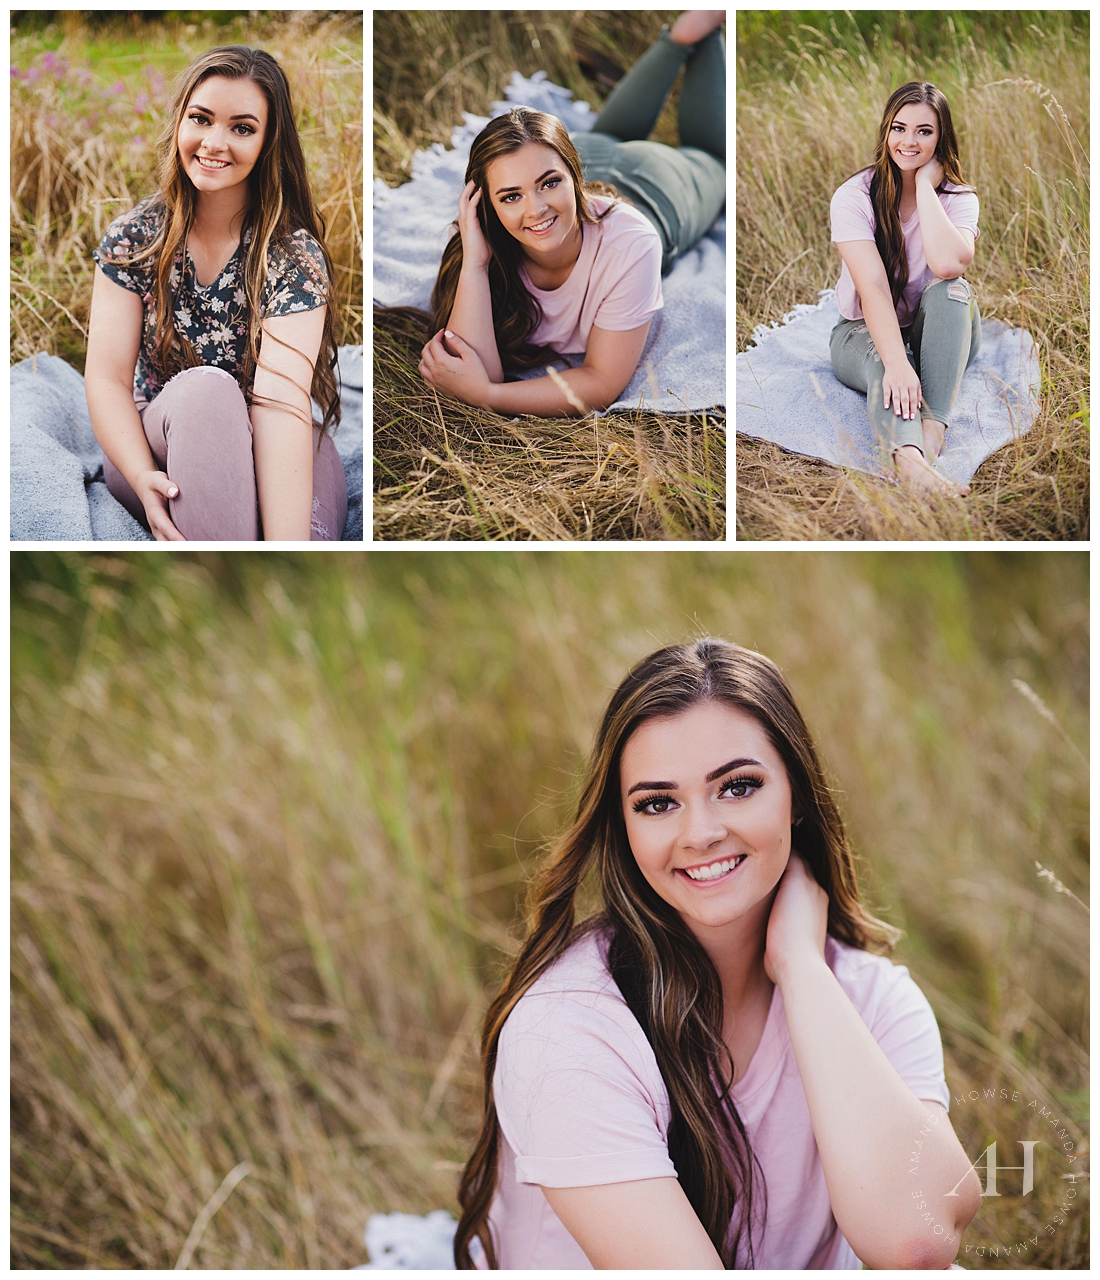 Senior Portraits in a Grassy Field photographed by Tacoma senior photographer Amanda Howse